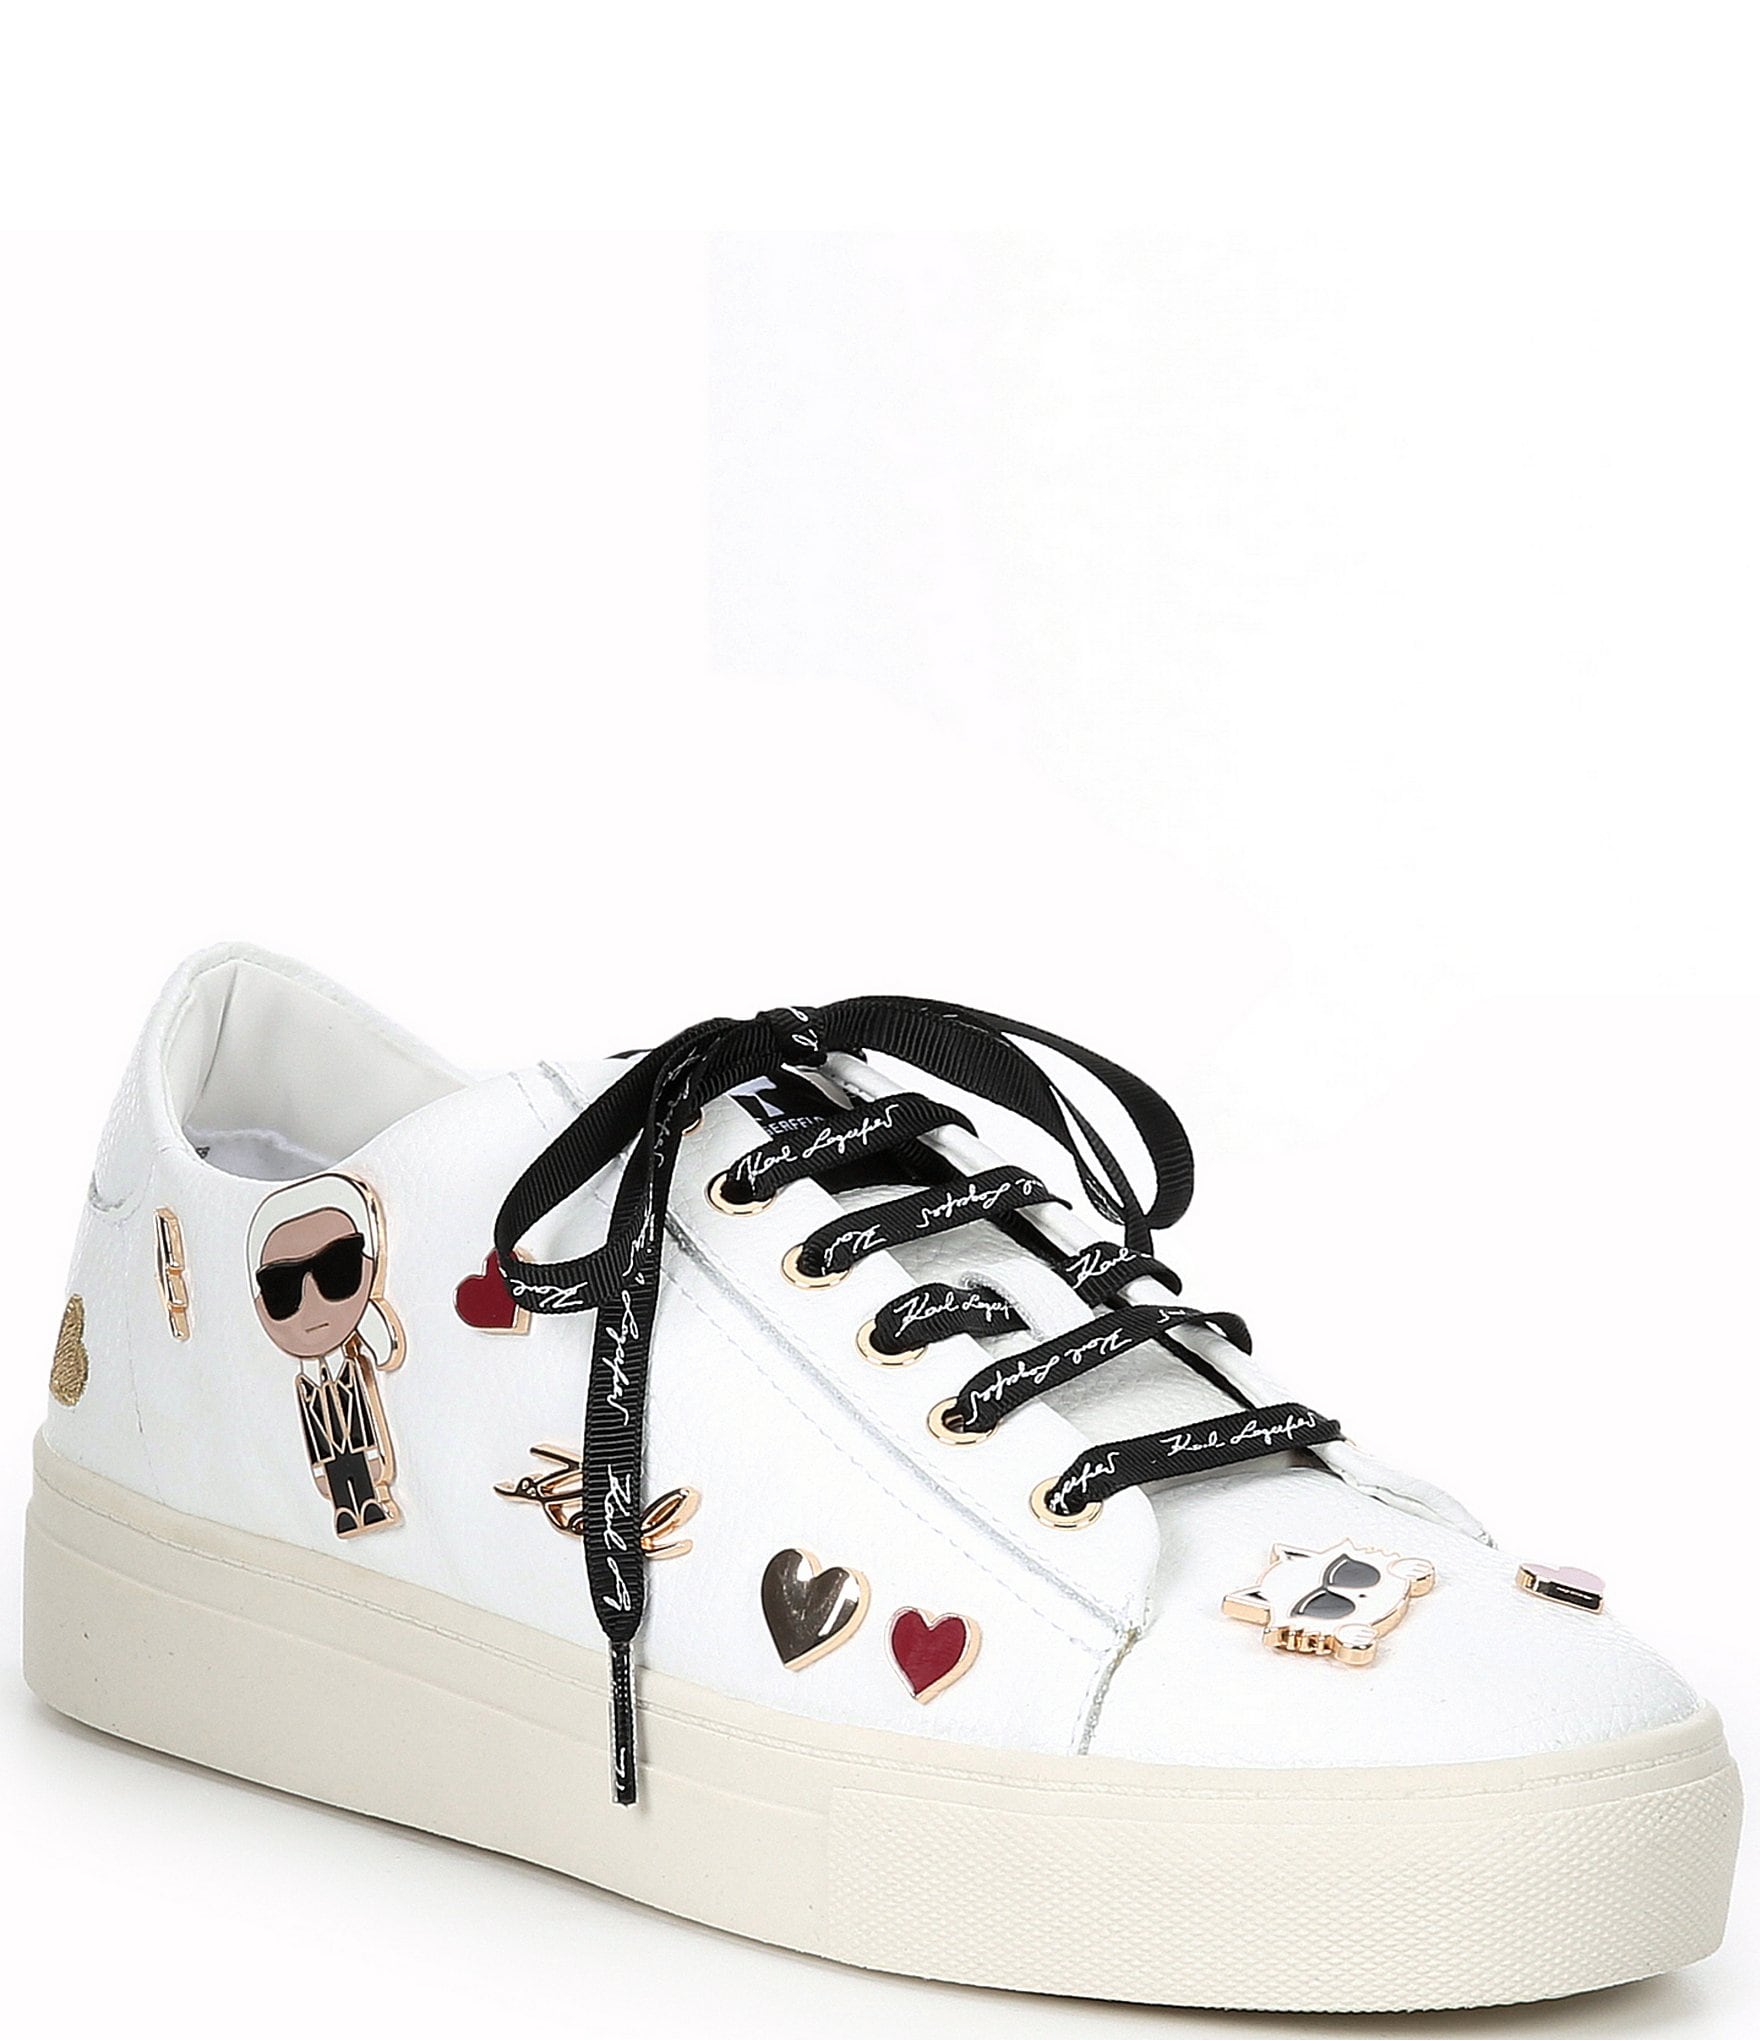 Karl Lagerfeld Paris Women's Cate Embellished Sneakers, White